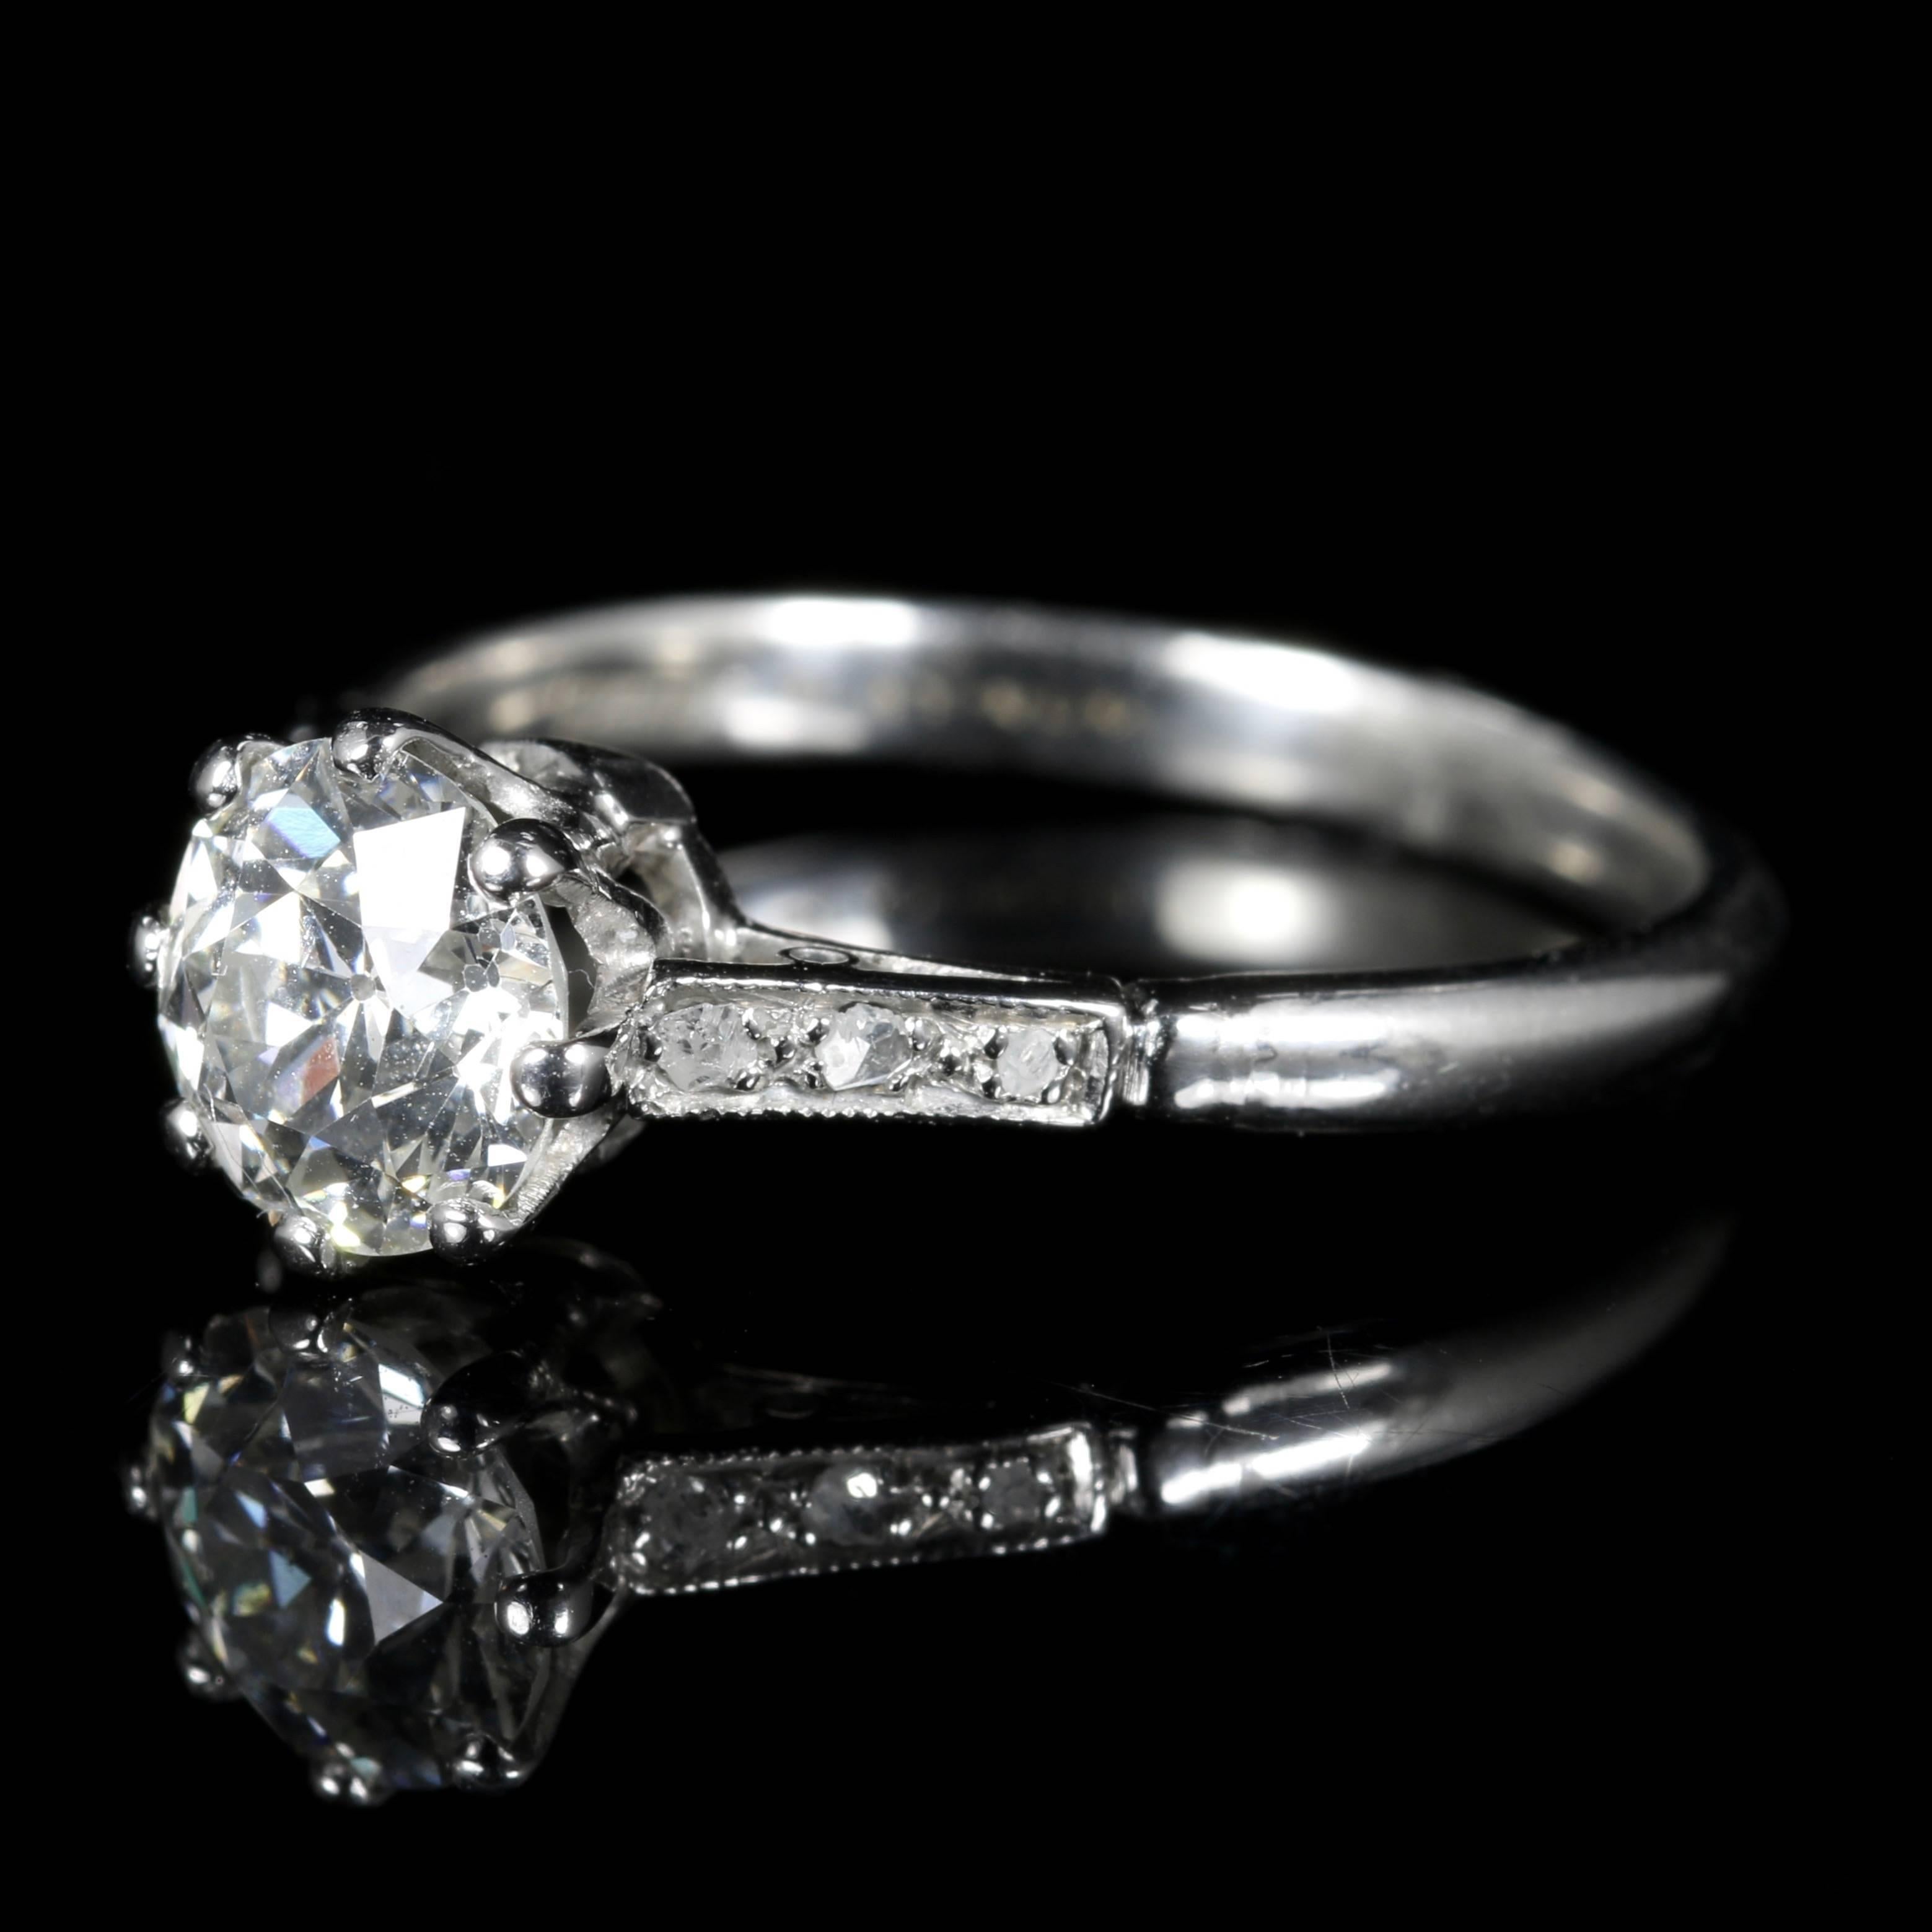 This fabulous antique Edwardian all Platinum Diamond ring is Circa 1915.

The large old cut Diamond solitaire is 1.30ct in size with additional Diamonds chasing down each shoulder.

The Diamonds sparkle beautifully complimenting the platinum.

There